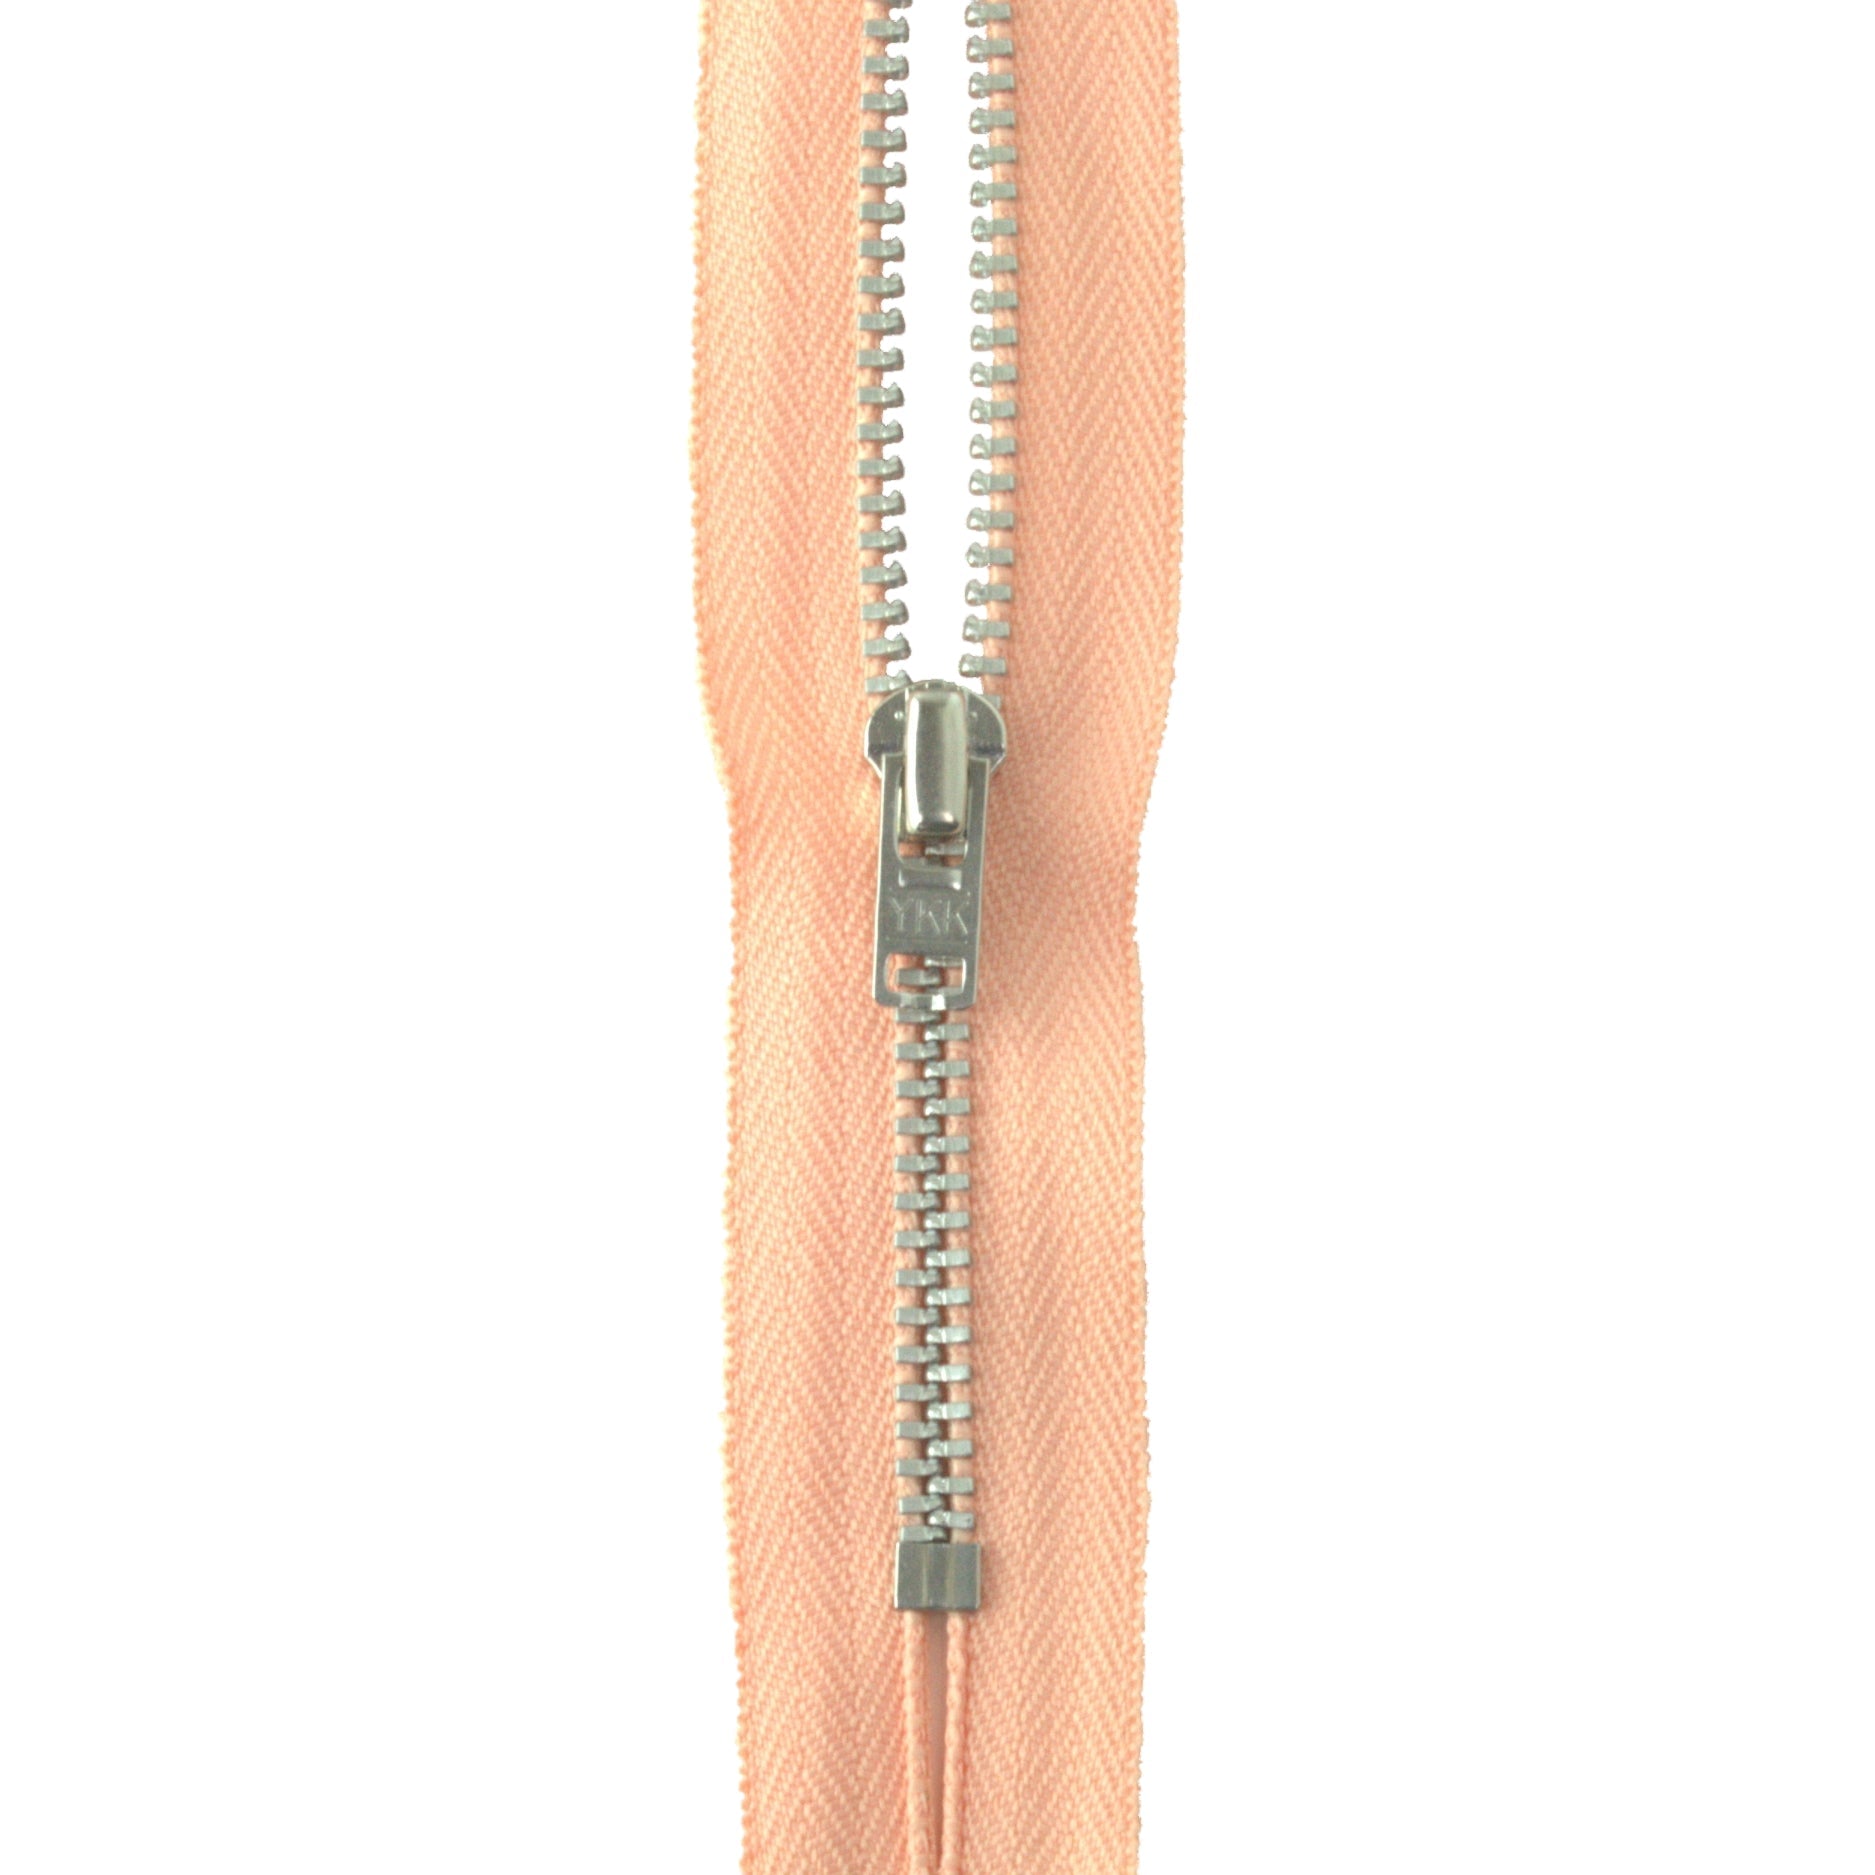 YKK silver tooth Metal Dress Zips - Peach from Jaycotts Sewing Supplies